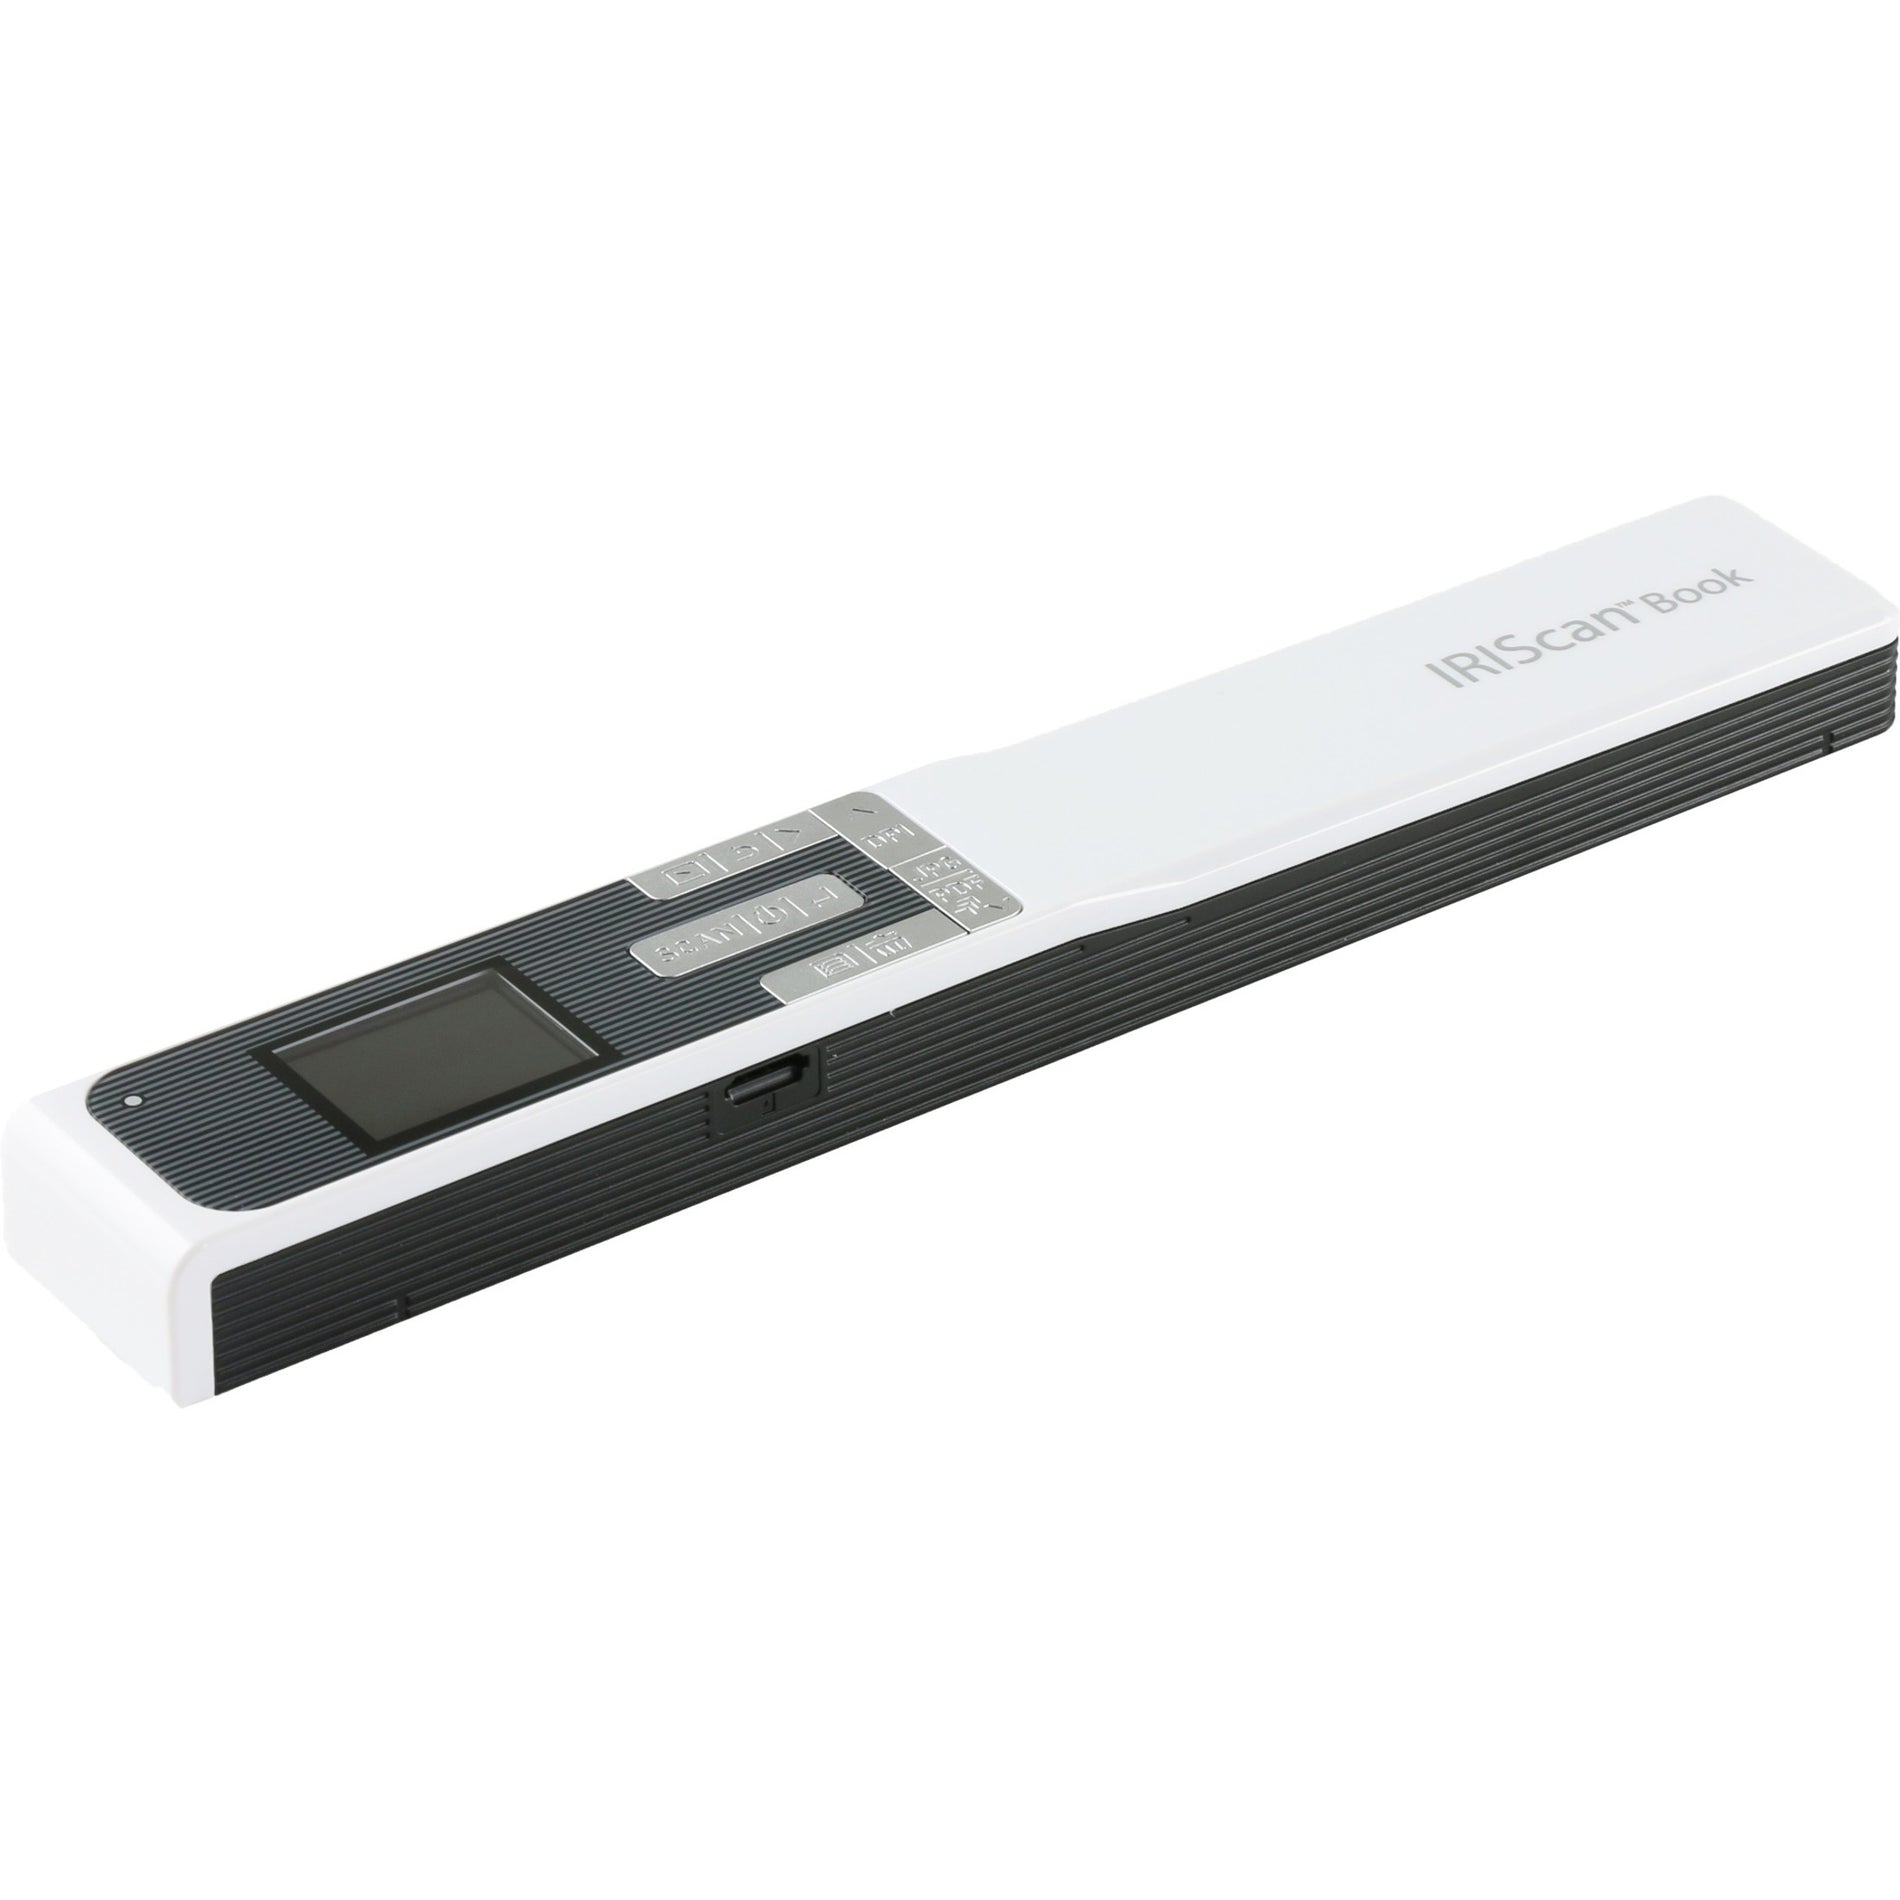 I.R.I.S. 458743 IRIScan Book 5 White Portable Document And Photo Scanner, Cordless, A4 Size, Color Scanning